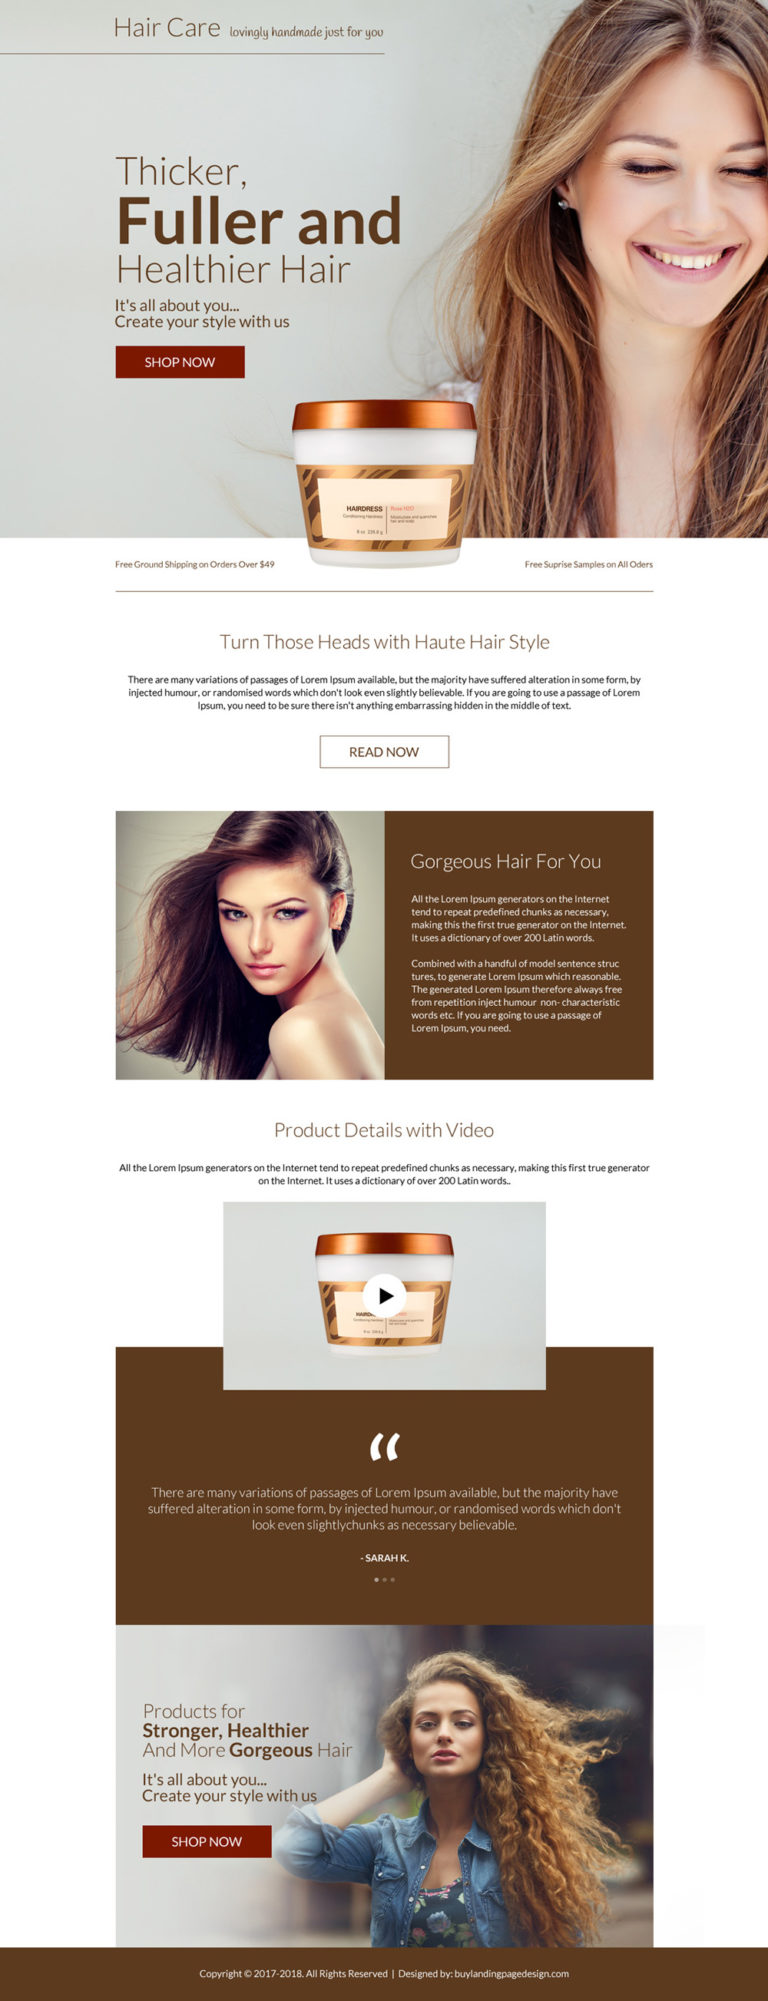 Hair care product selling bootstrap landing page design